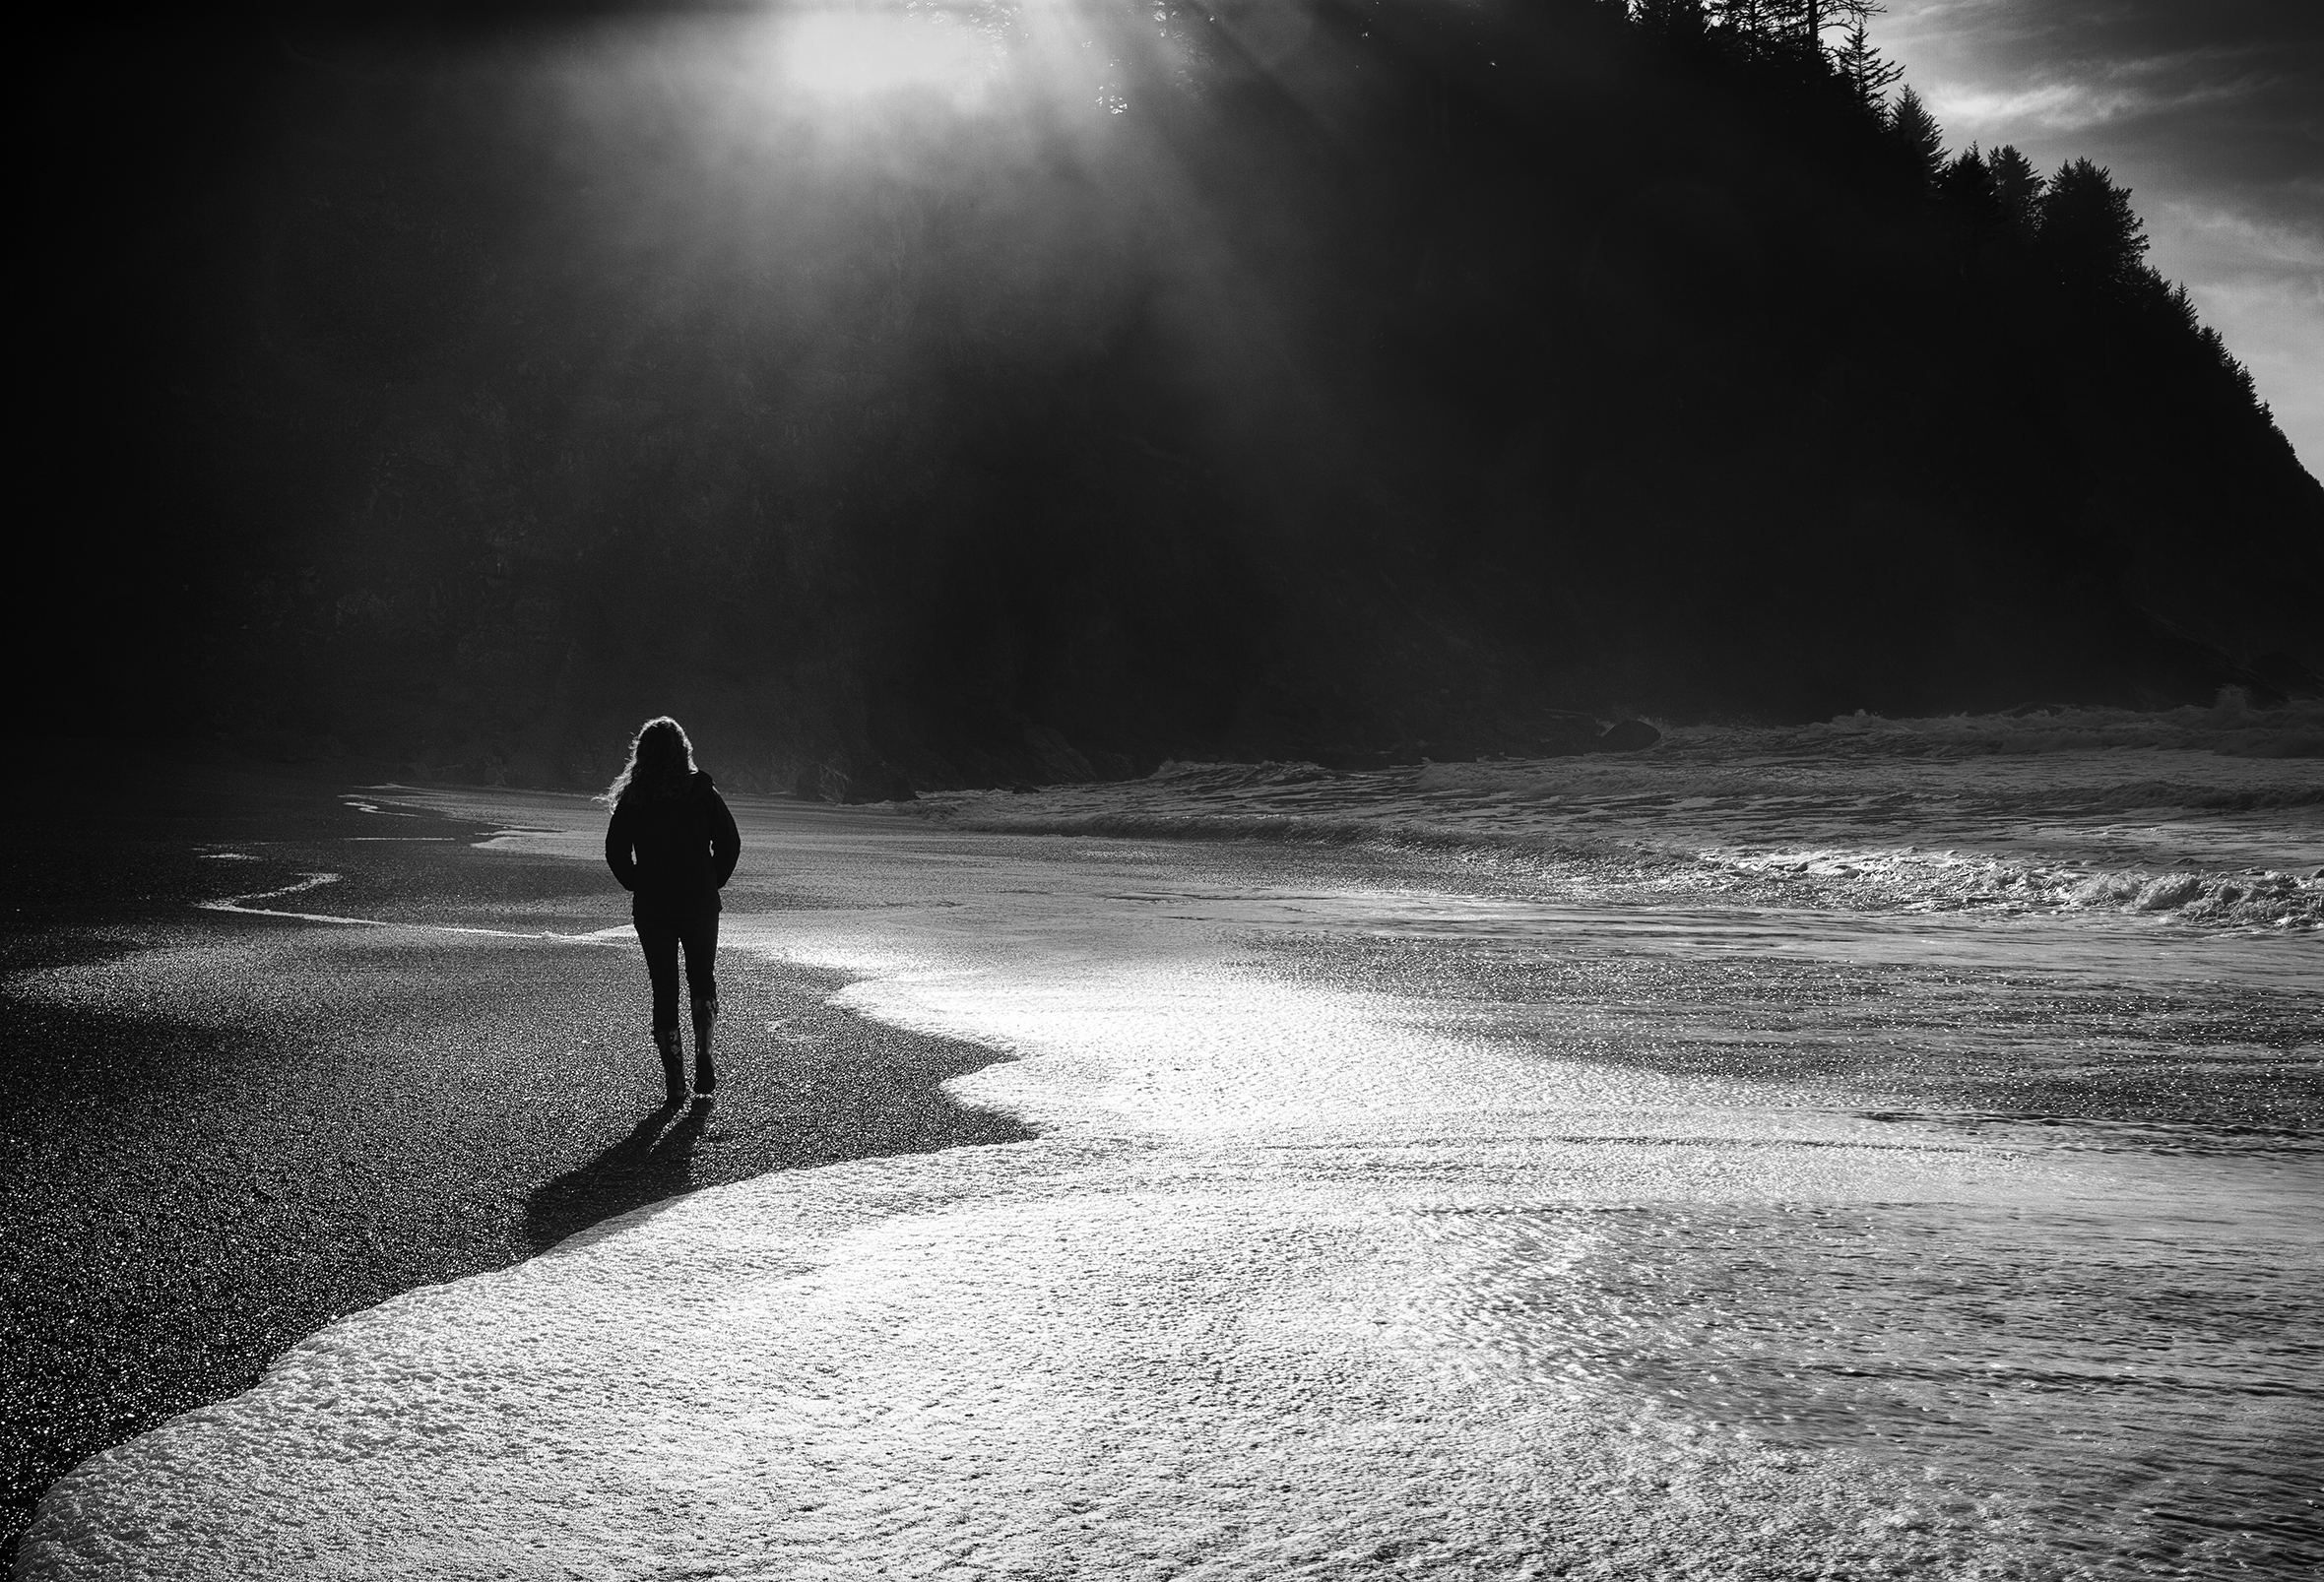 Woman walking into the morning sun on the beach. The coastline she is walking toward is hilly and tree-covered. She is shot from the back and is wearing a jacket, jeans, and boots.